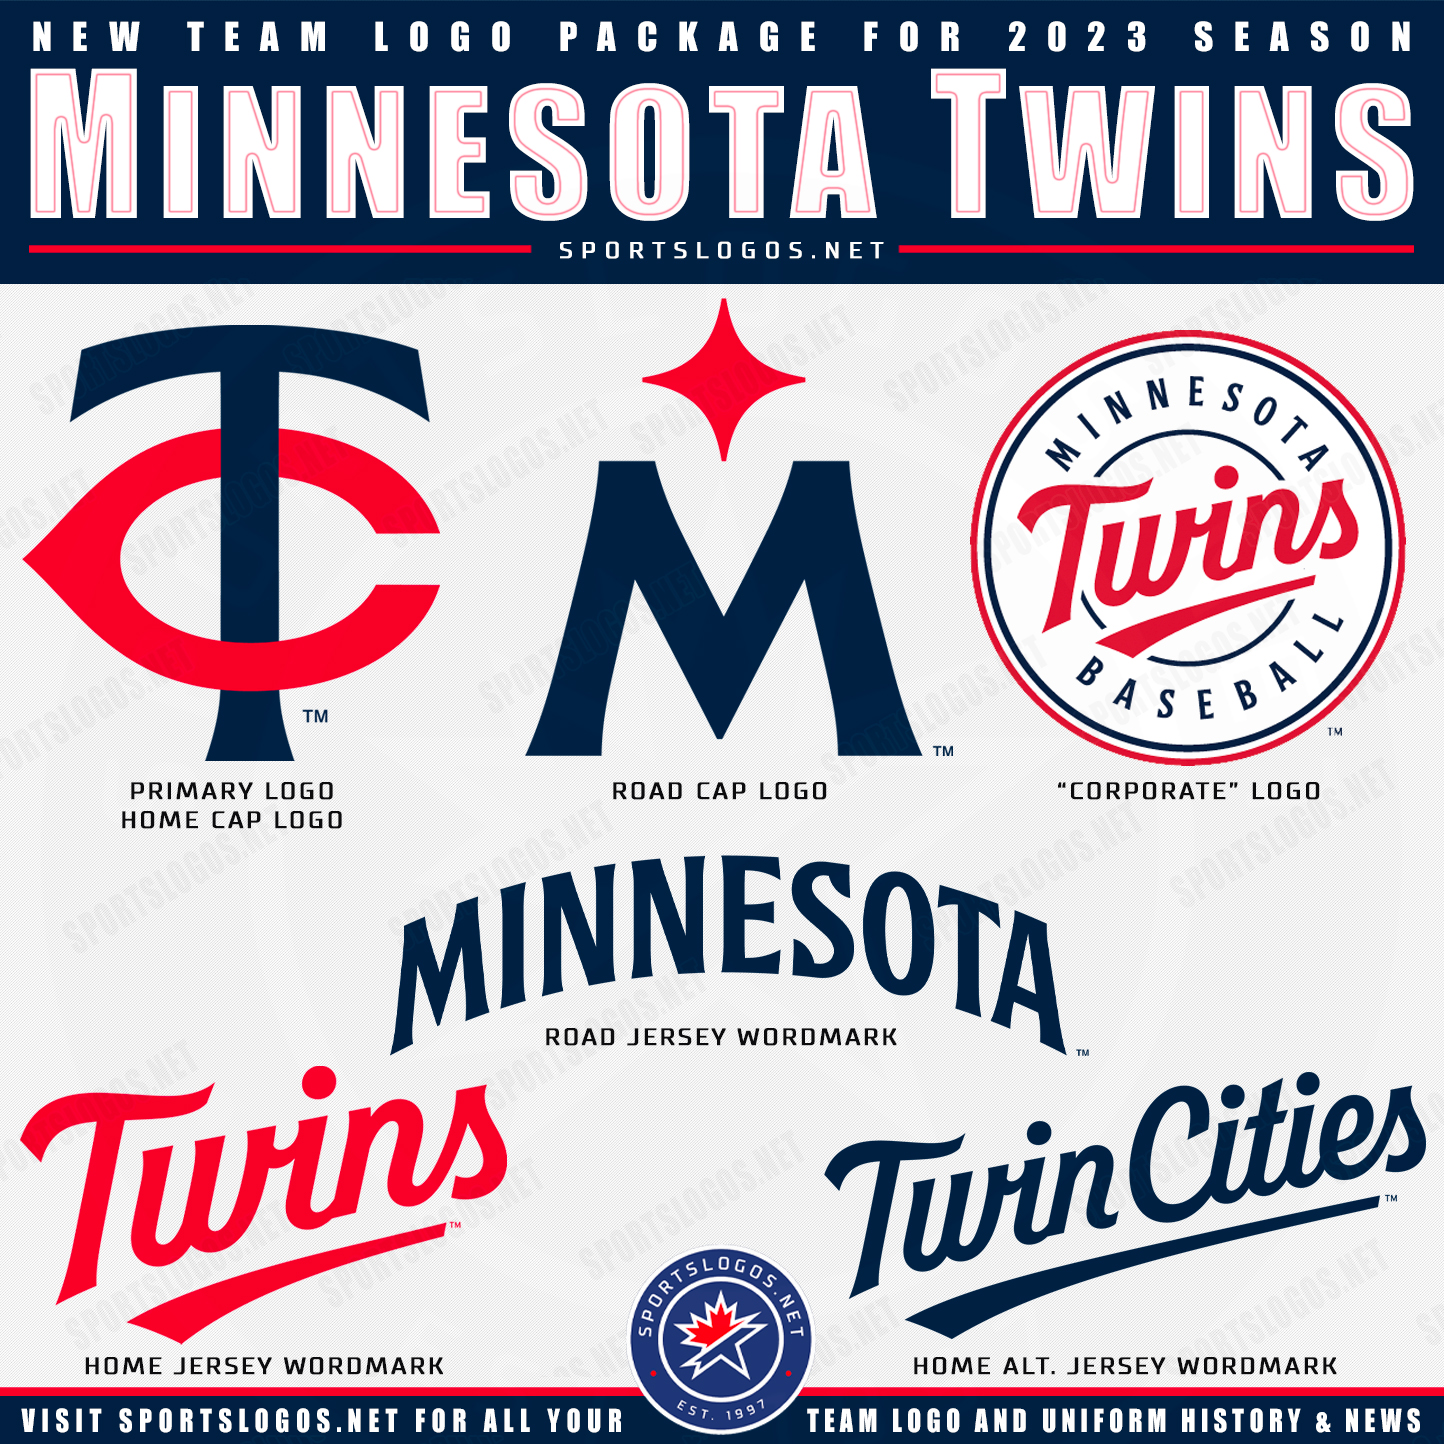 What's New in MLB Logos and Uniforms for 2023 – SportsLogos.Net News